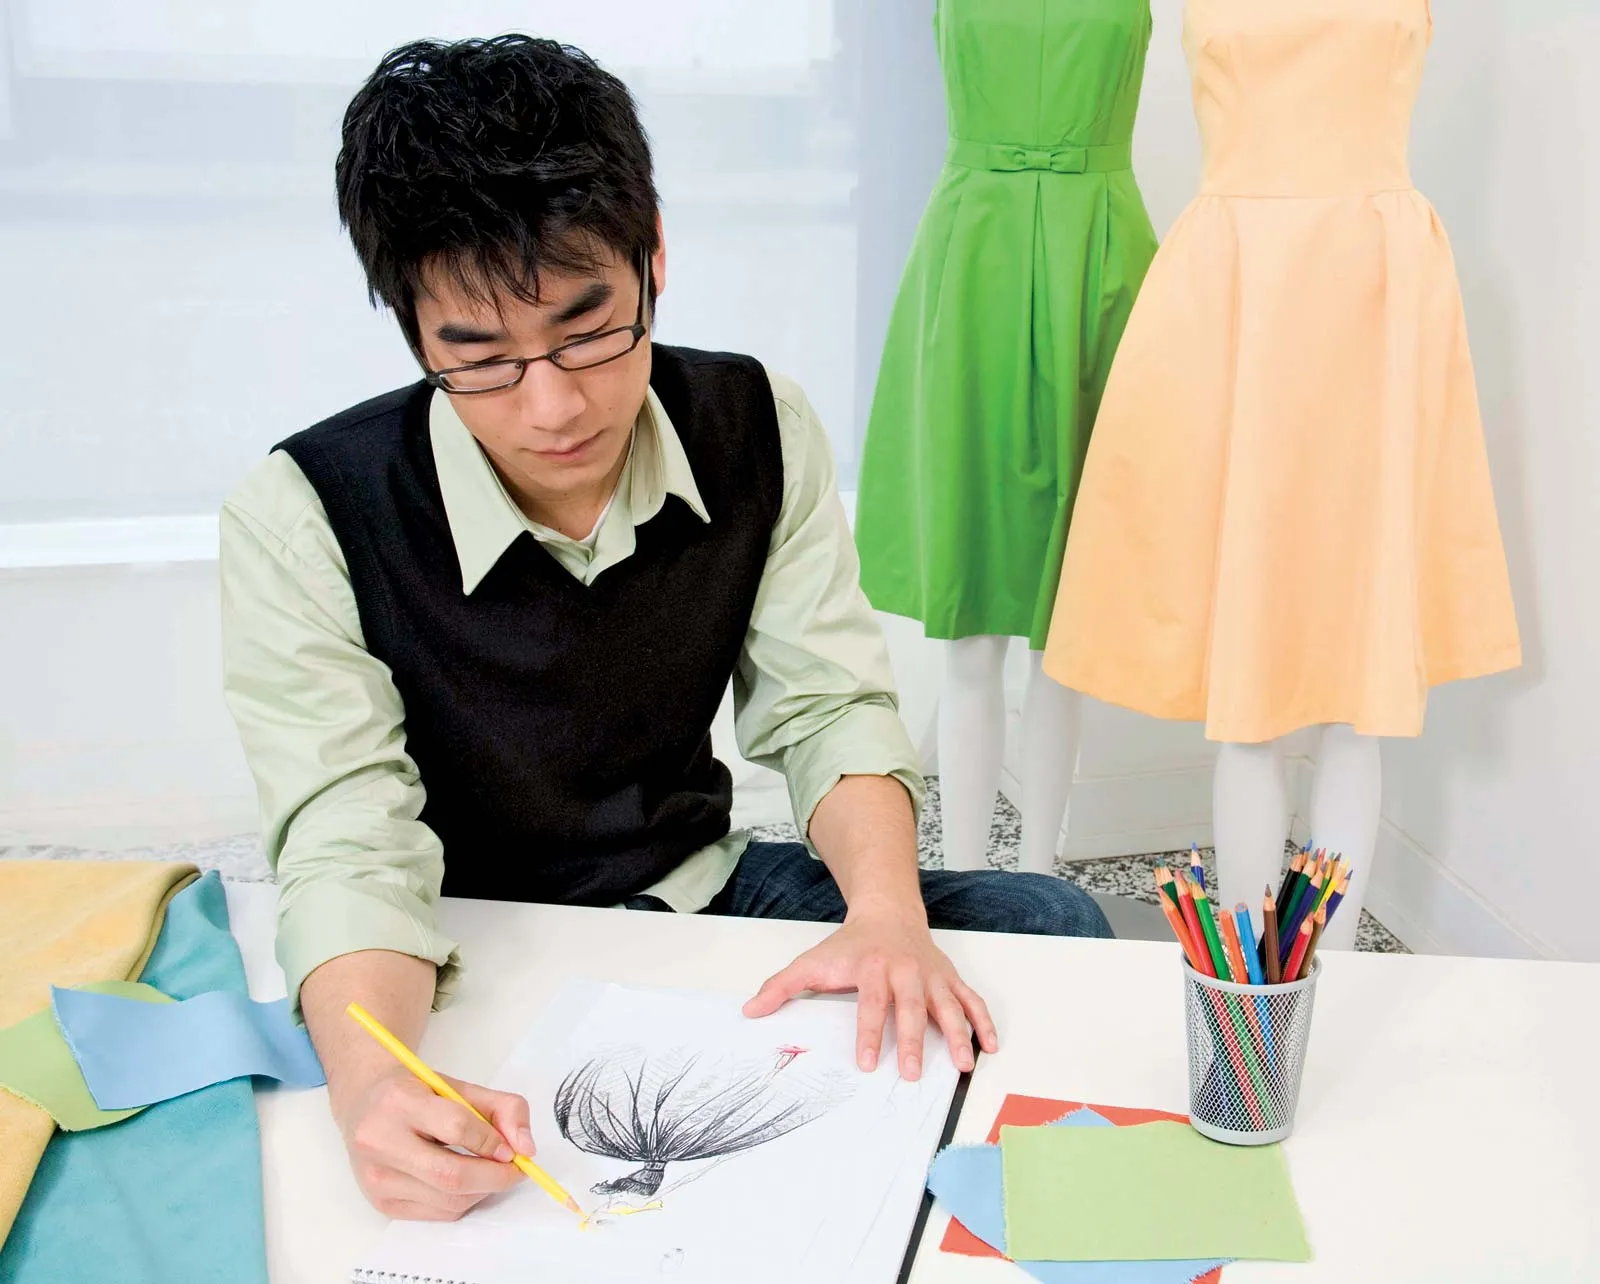 8 Tips Every Emerging Fashion Designer Should Know